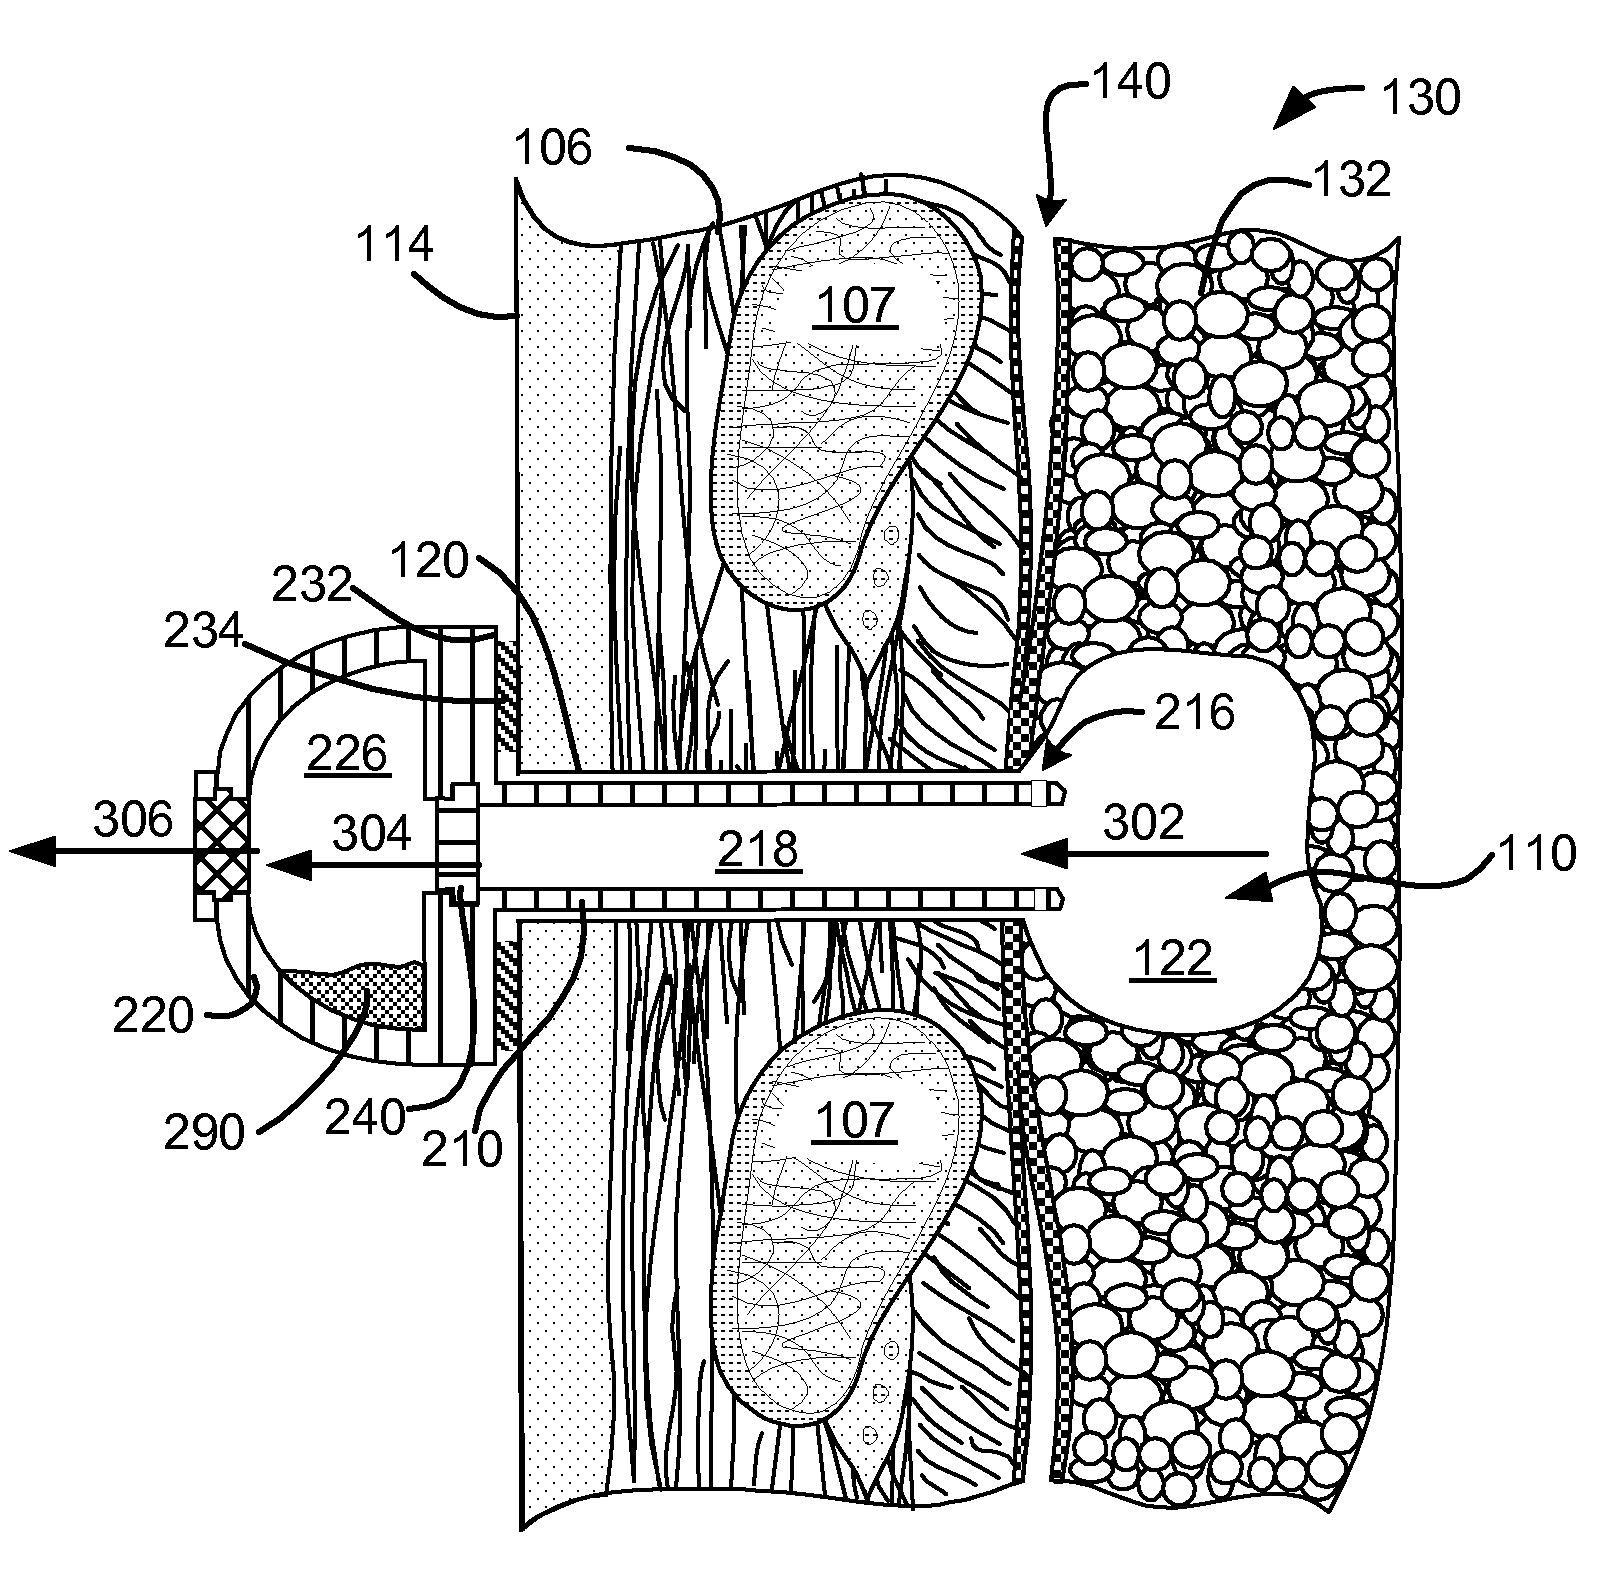 Enhanced pneumostoma management device and methods for treatment of chronic obstructive pulmonary disease